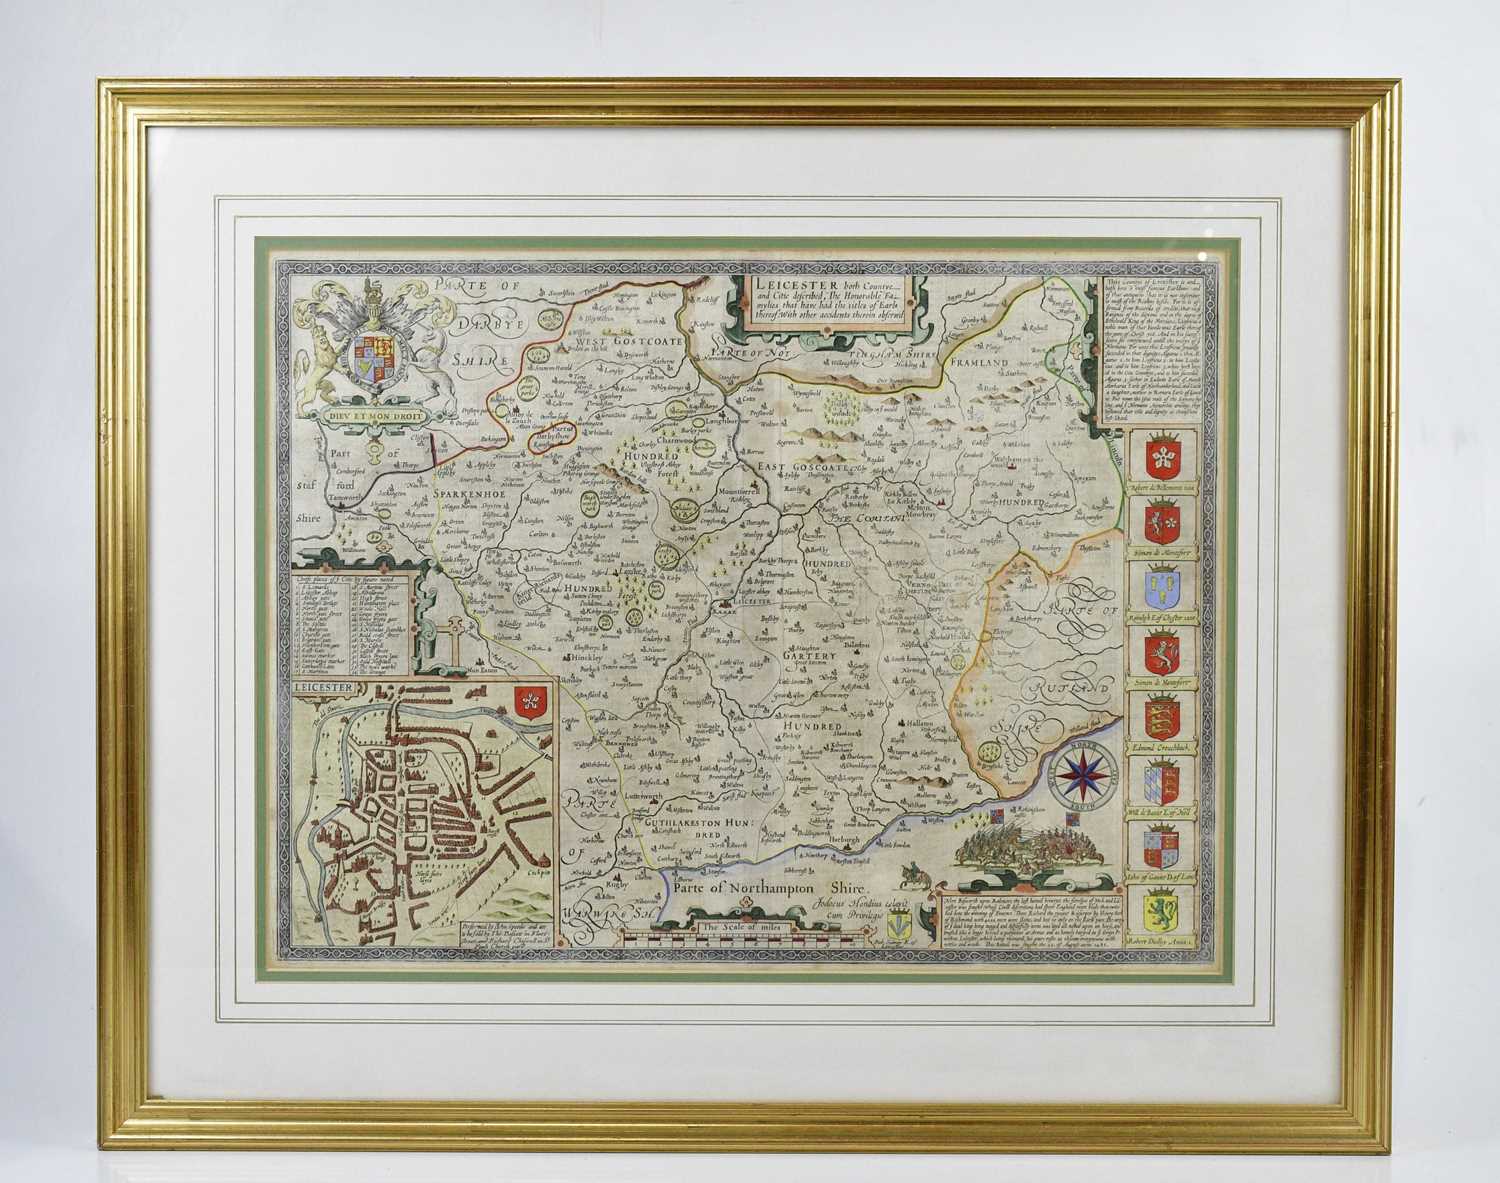 JOHN SPEED; a hand tinted map of Leicester, 39 x 52cm, framed and glazed.